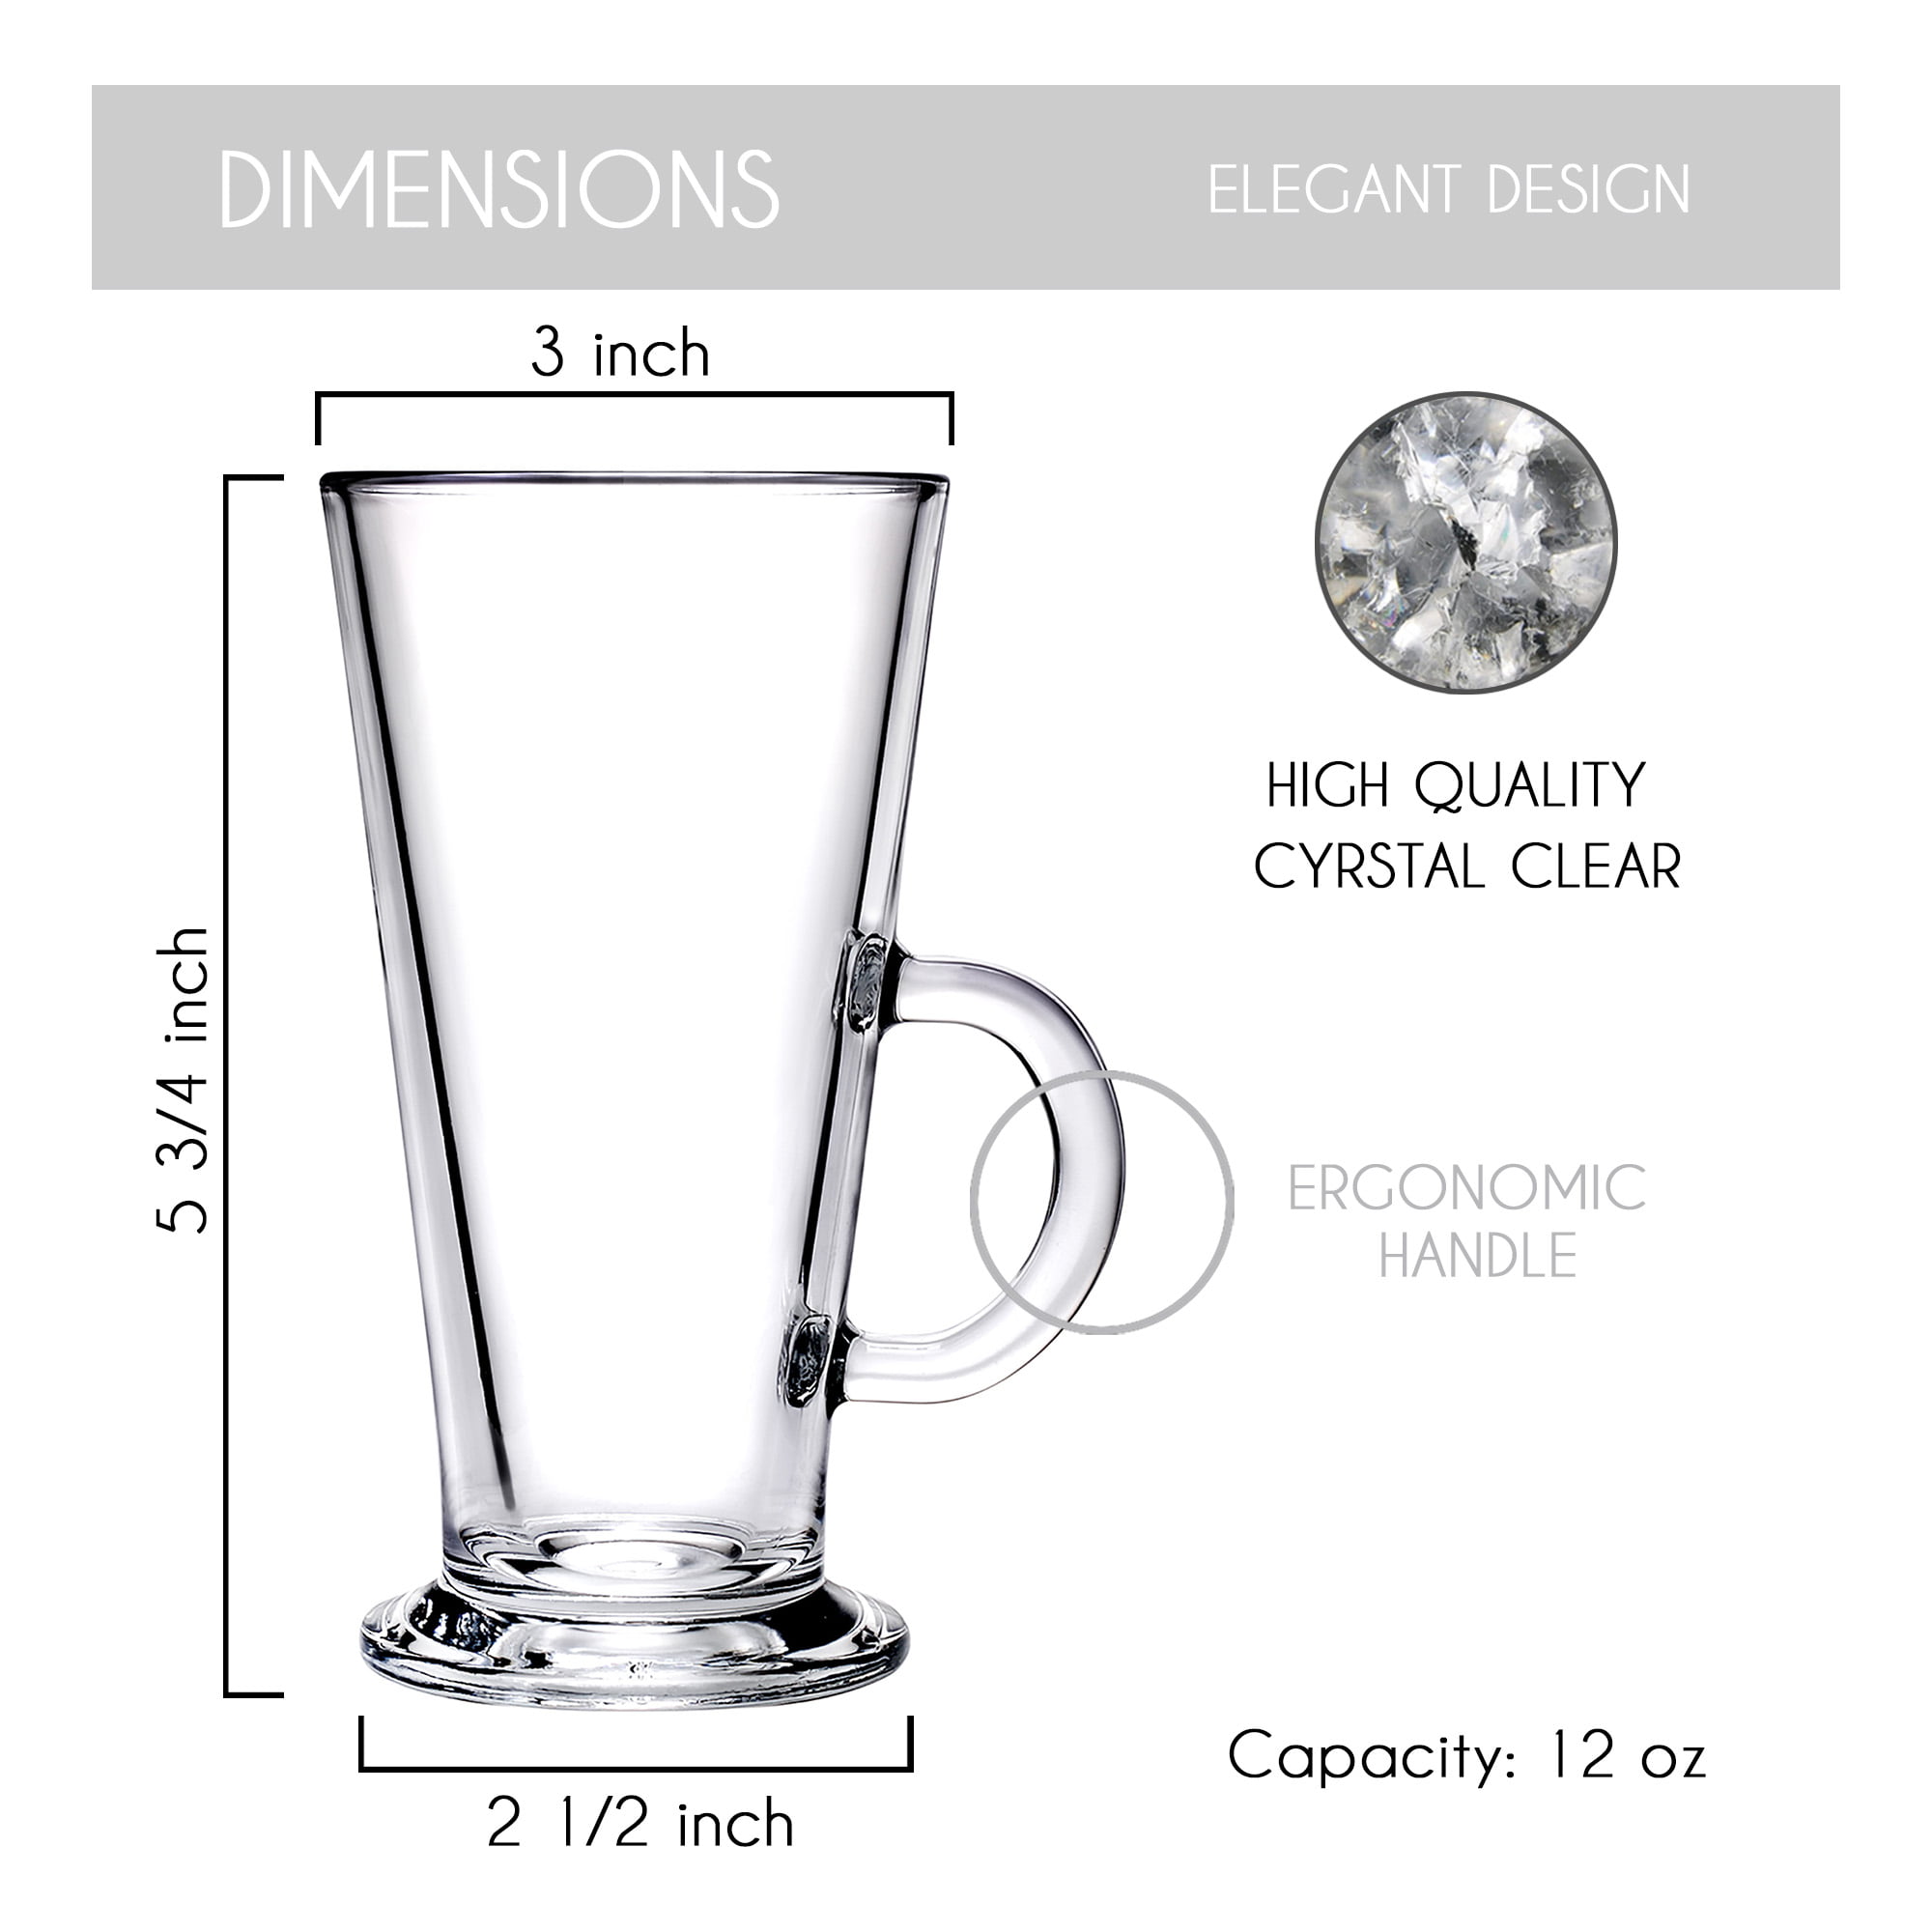 Crystalia Set of 2 Irish Coffee, Latte, Cappuccino and Hot Chocolate Glass Mugs with Handle, 7 3/4 oz, Clear